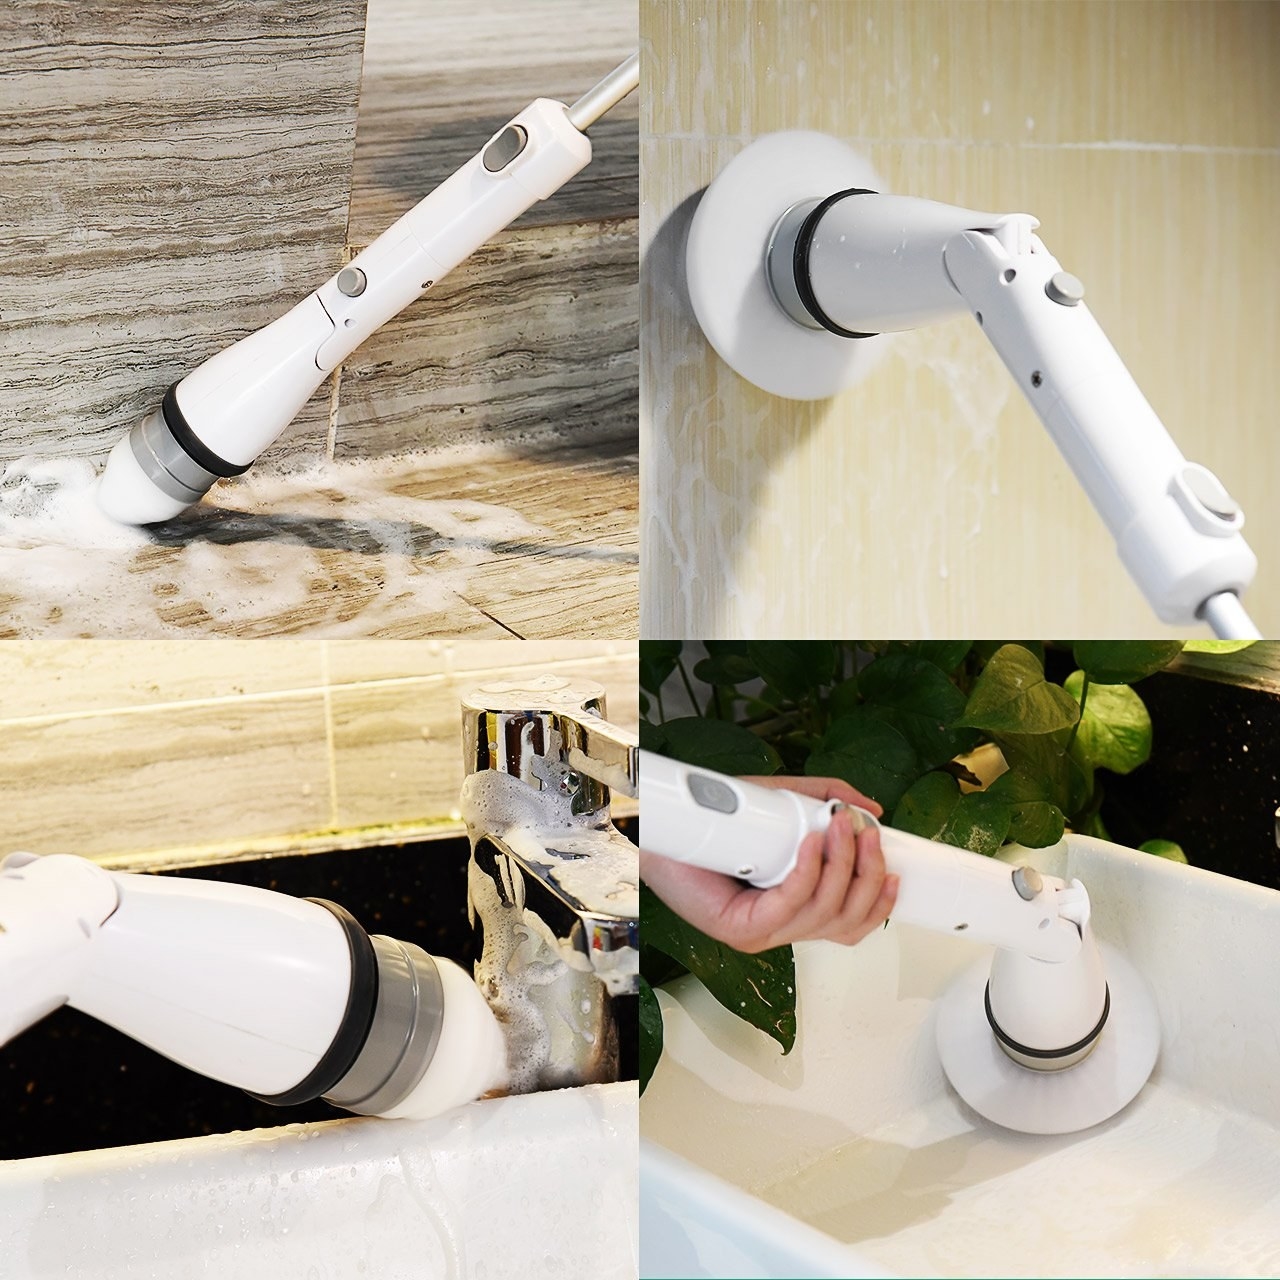 Electric scrubber is used to clean bathroom floor, walls, shower, sink, and bath tub